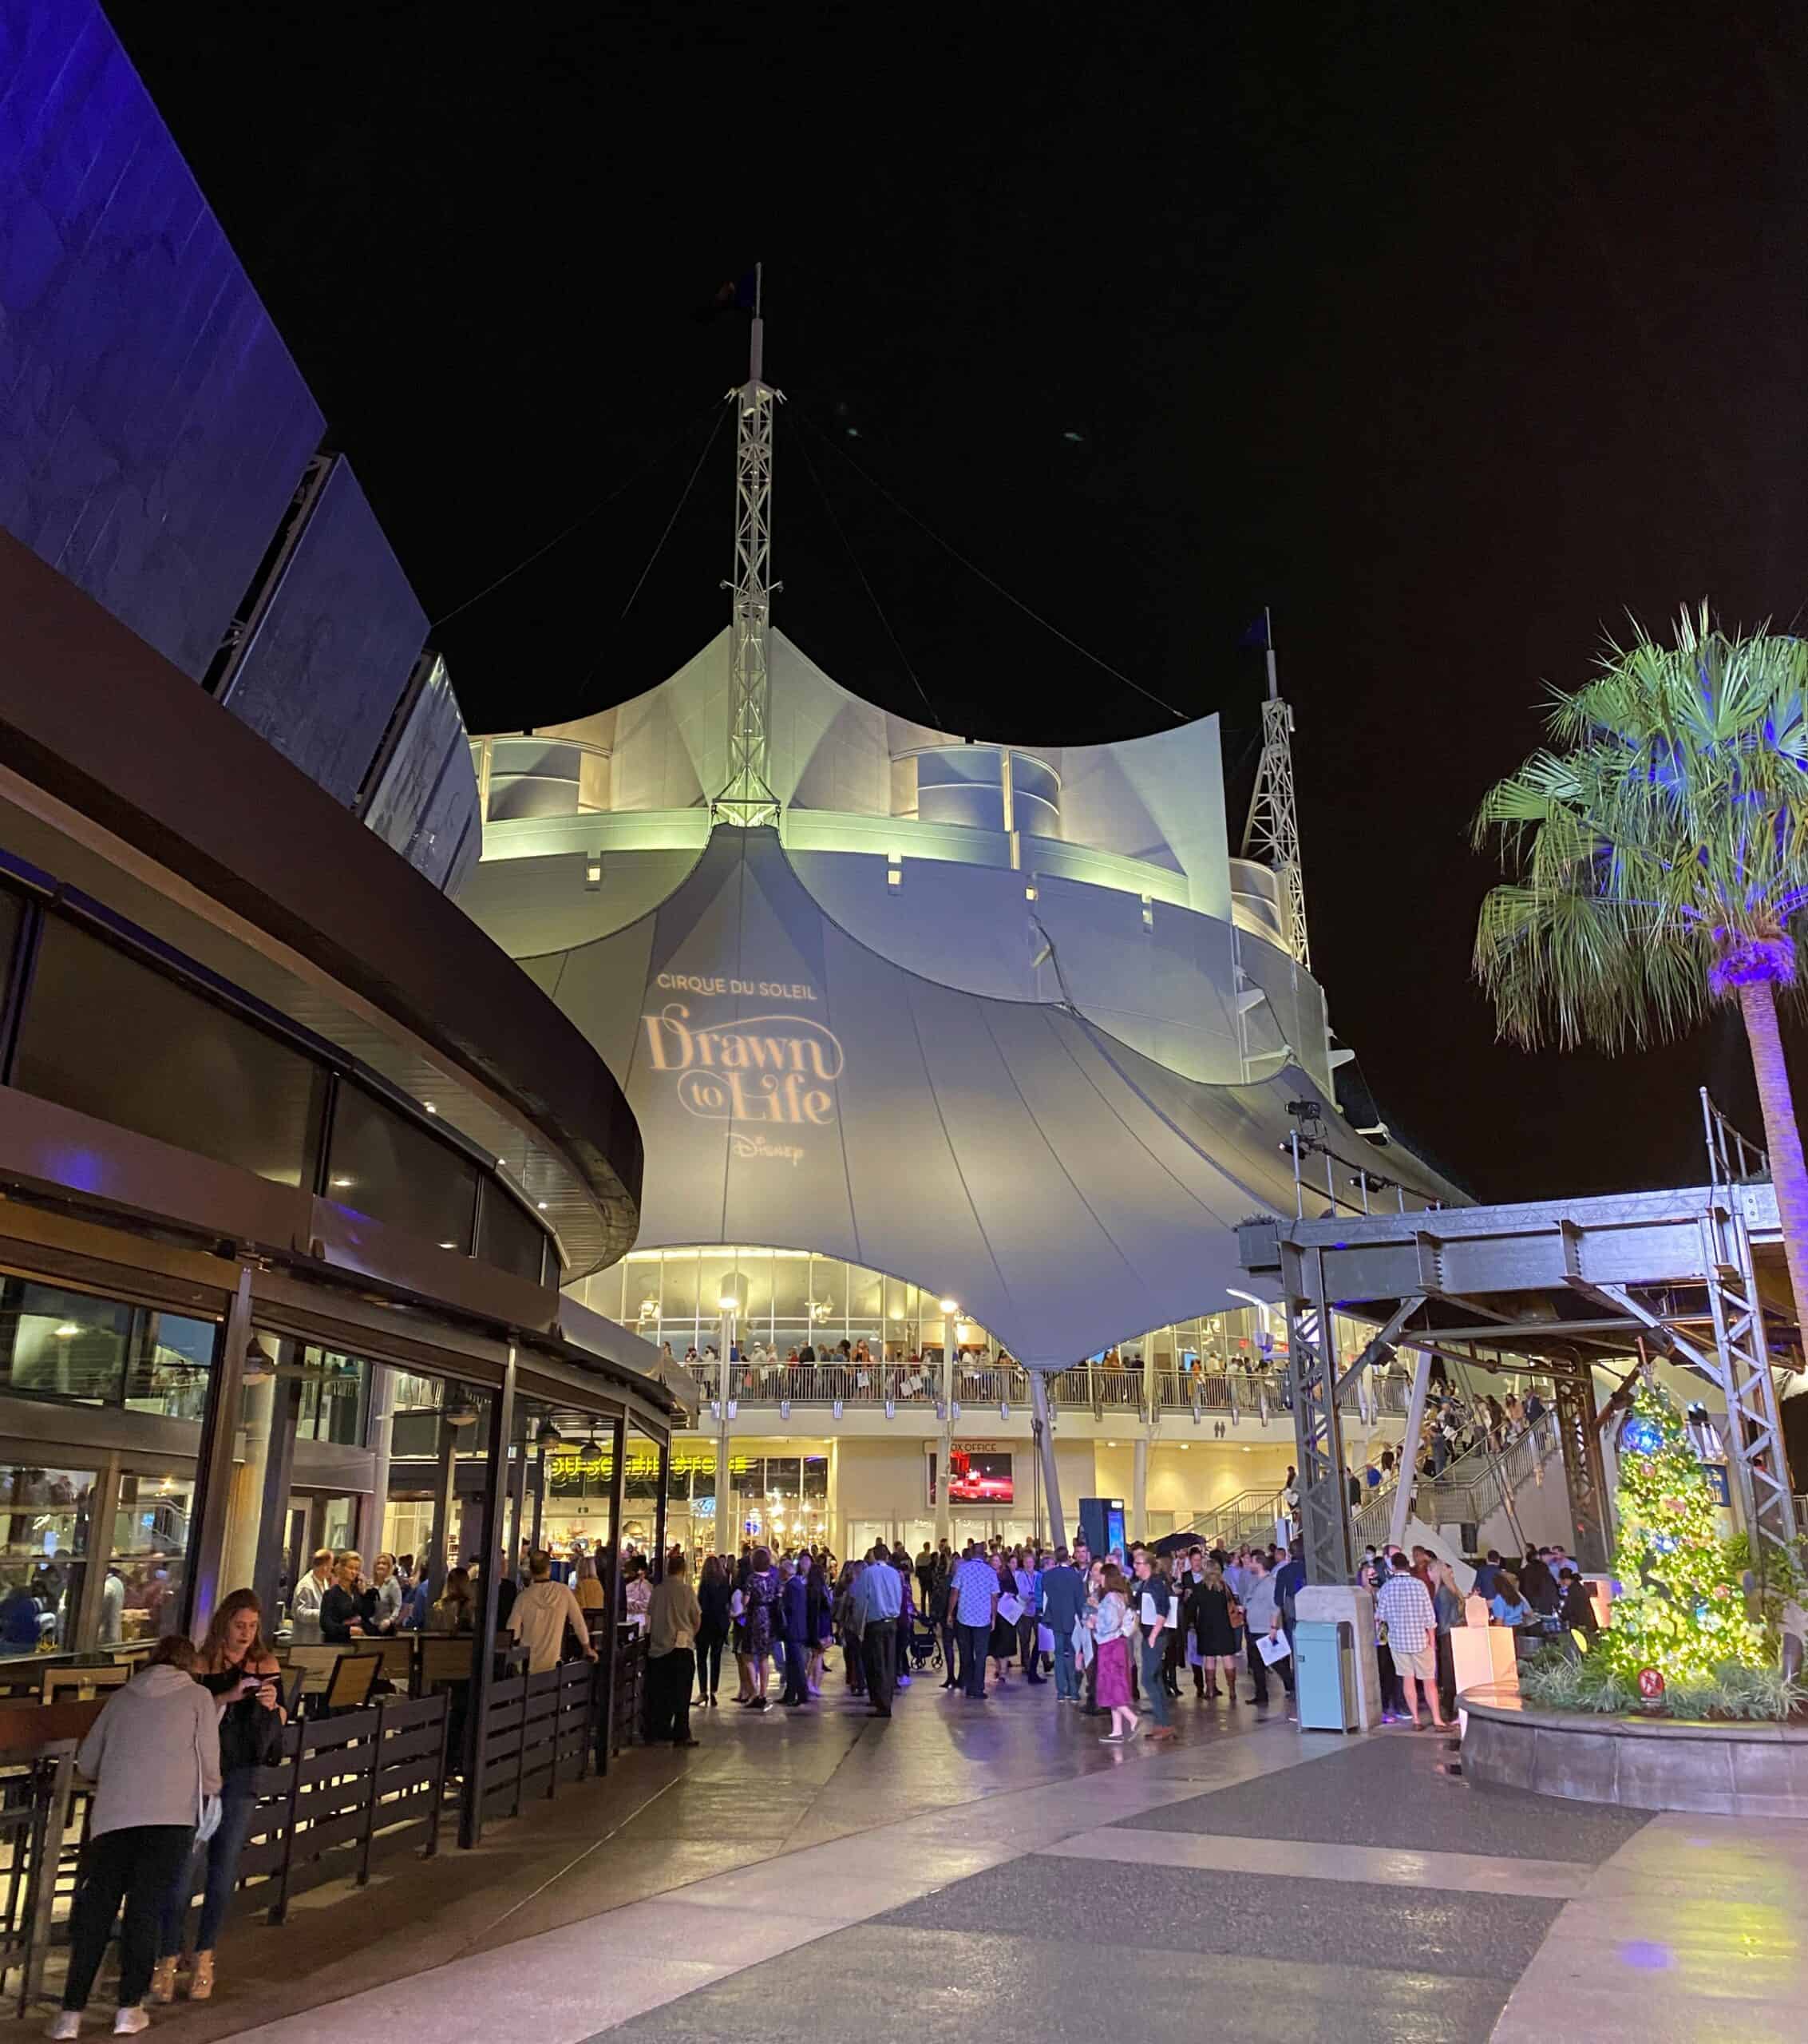 Cirque du Soleil Disney Springs Theater is a large white tent-like building at the edge of Disney Springs with restaurants nearby